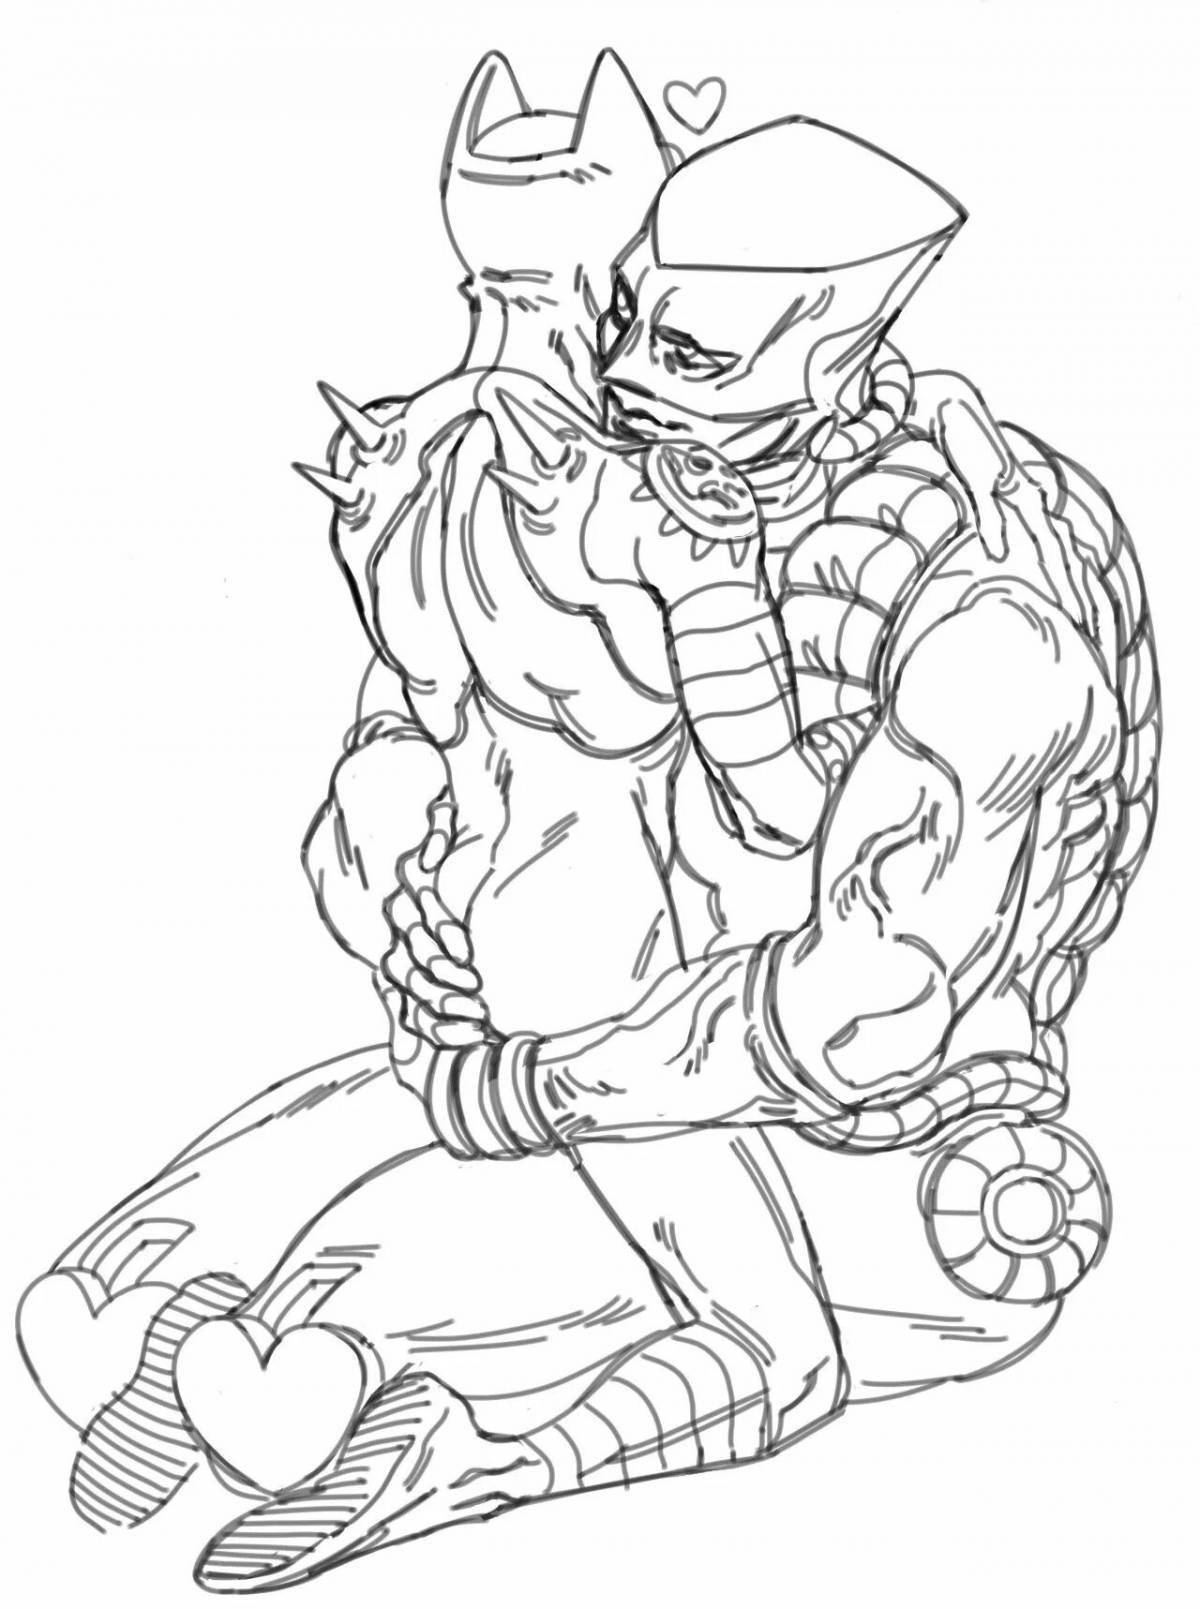 Gorgeous killer queen coloring page